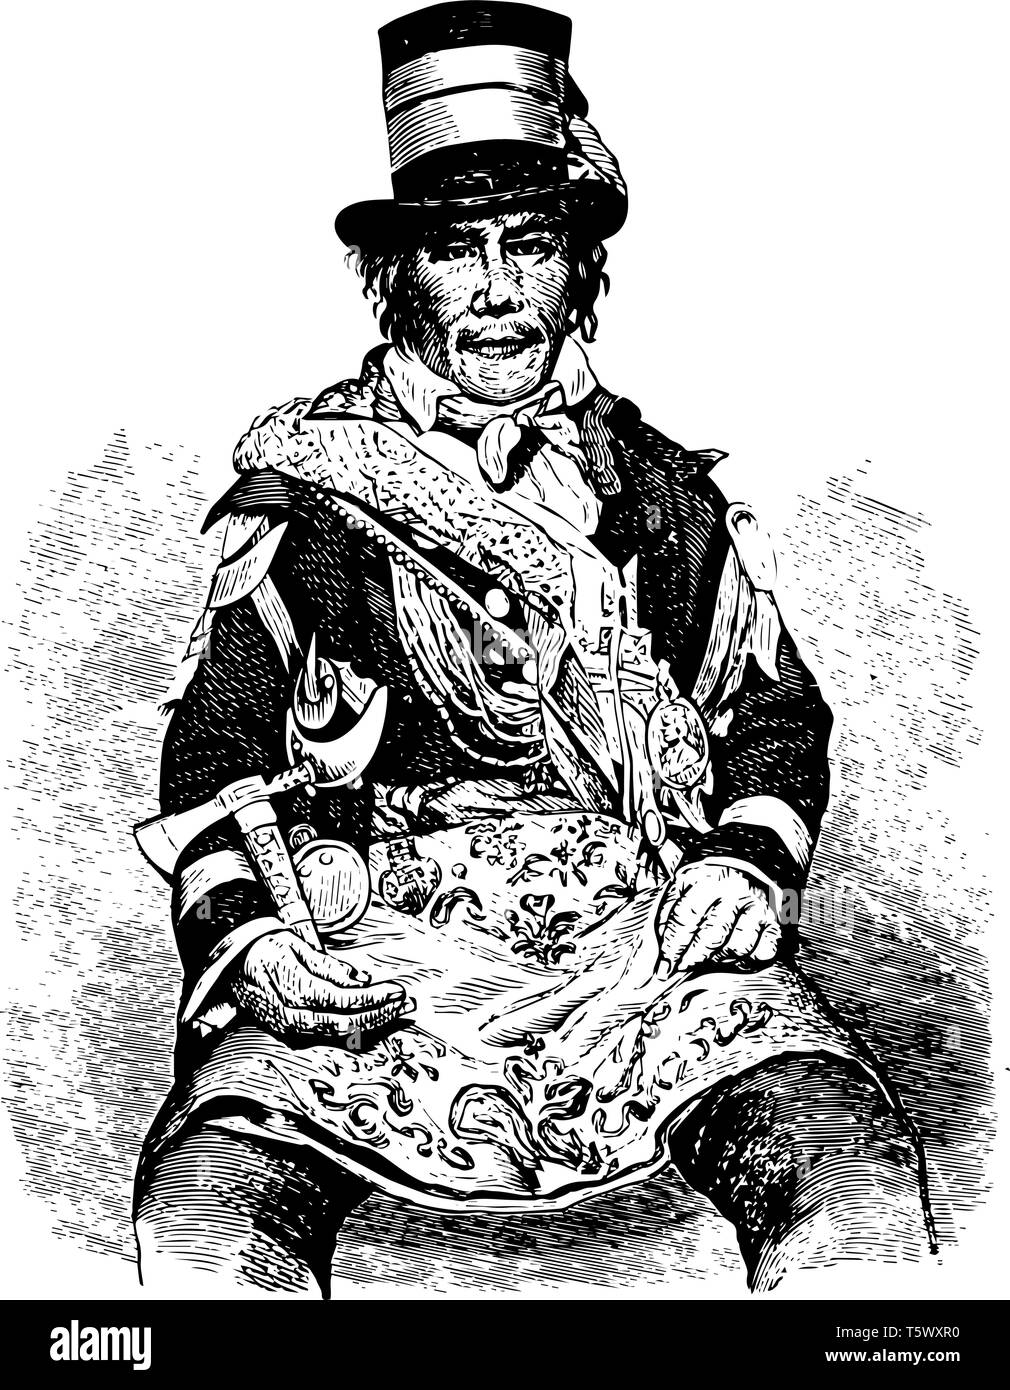 Oshawahnah he was a Tecumsehs deputy commander who led the Indians against American forces at the Battle of the Thames vintage line drawing or engravi Stock Vector